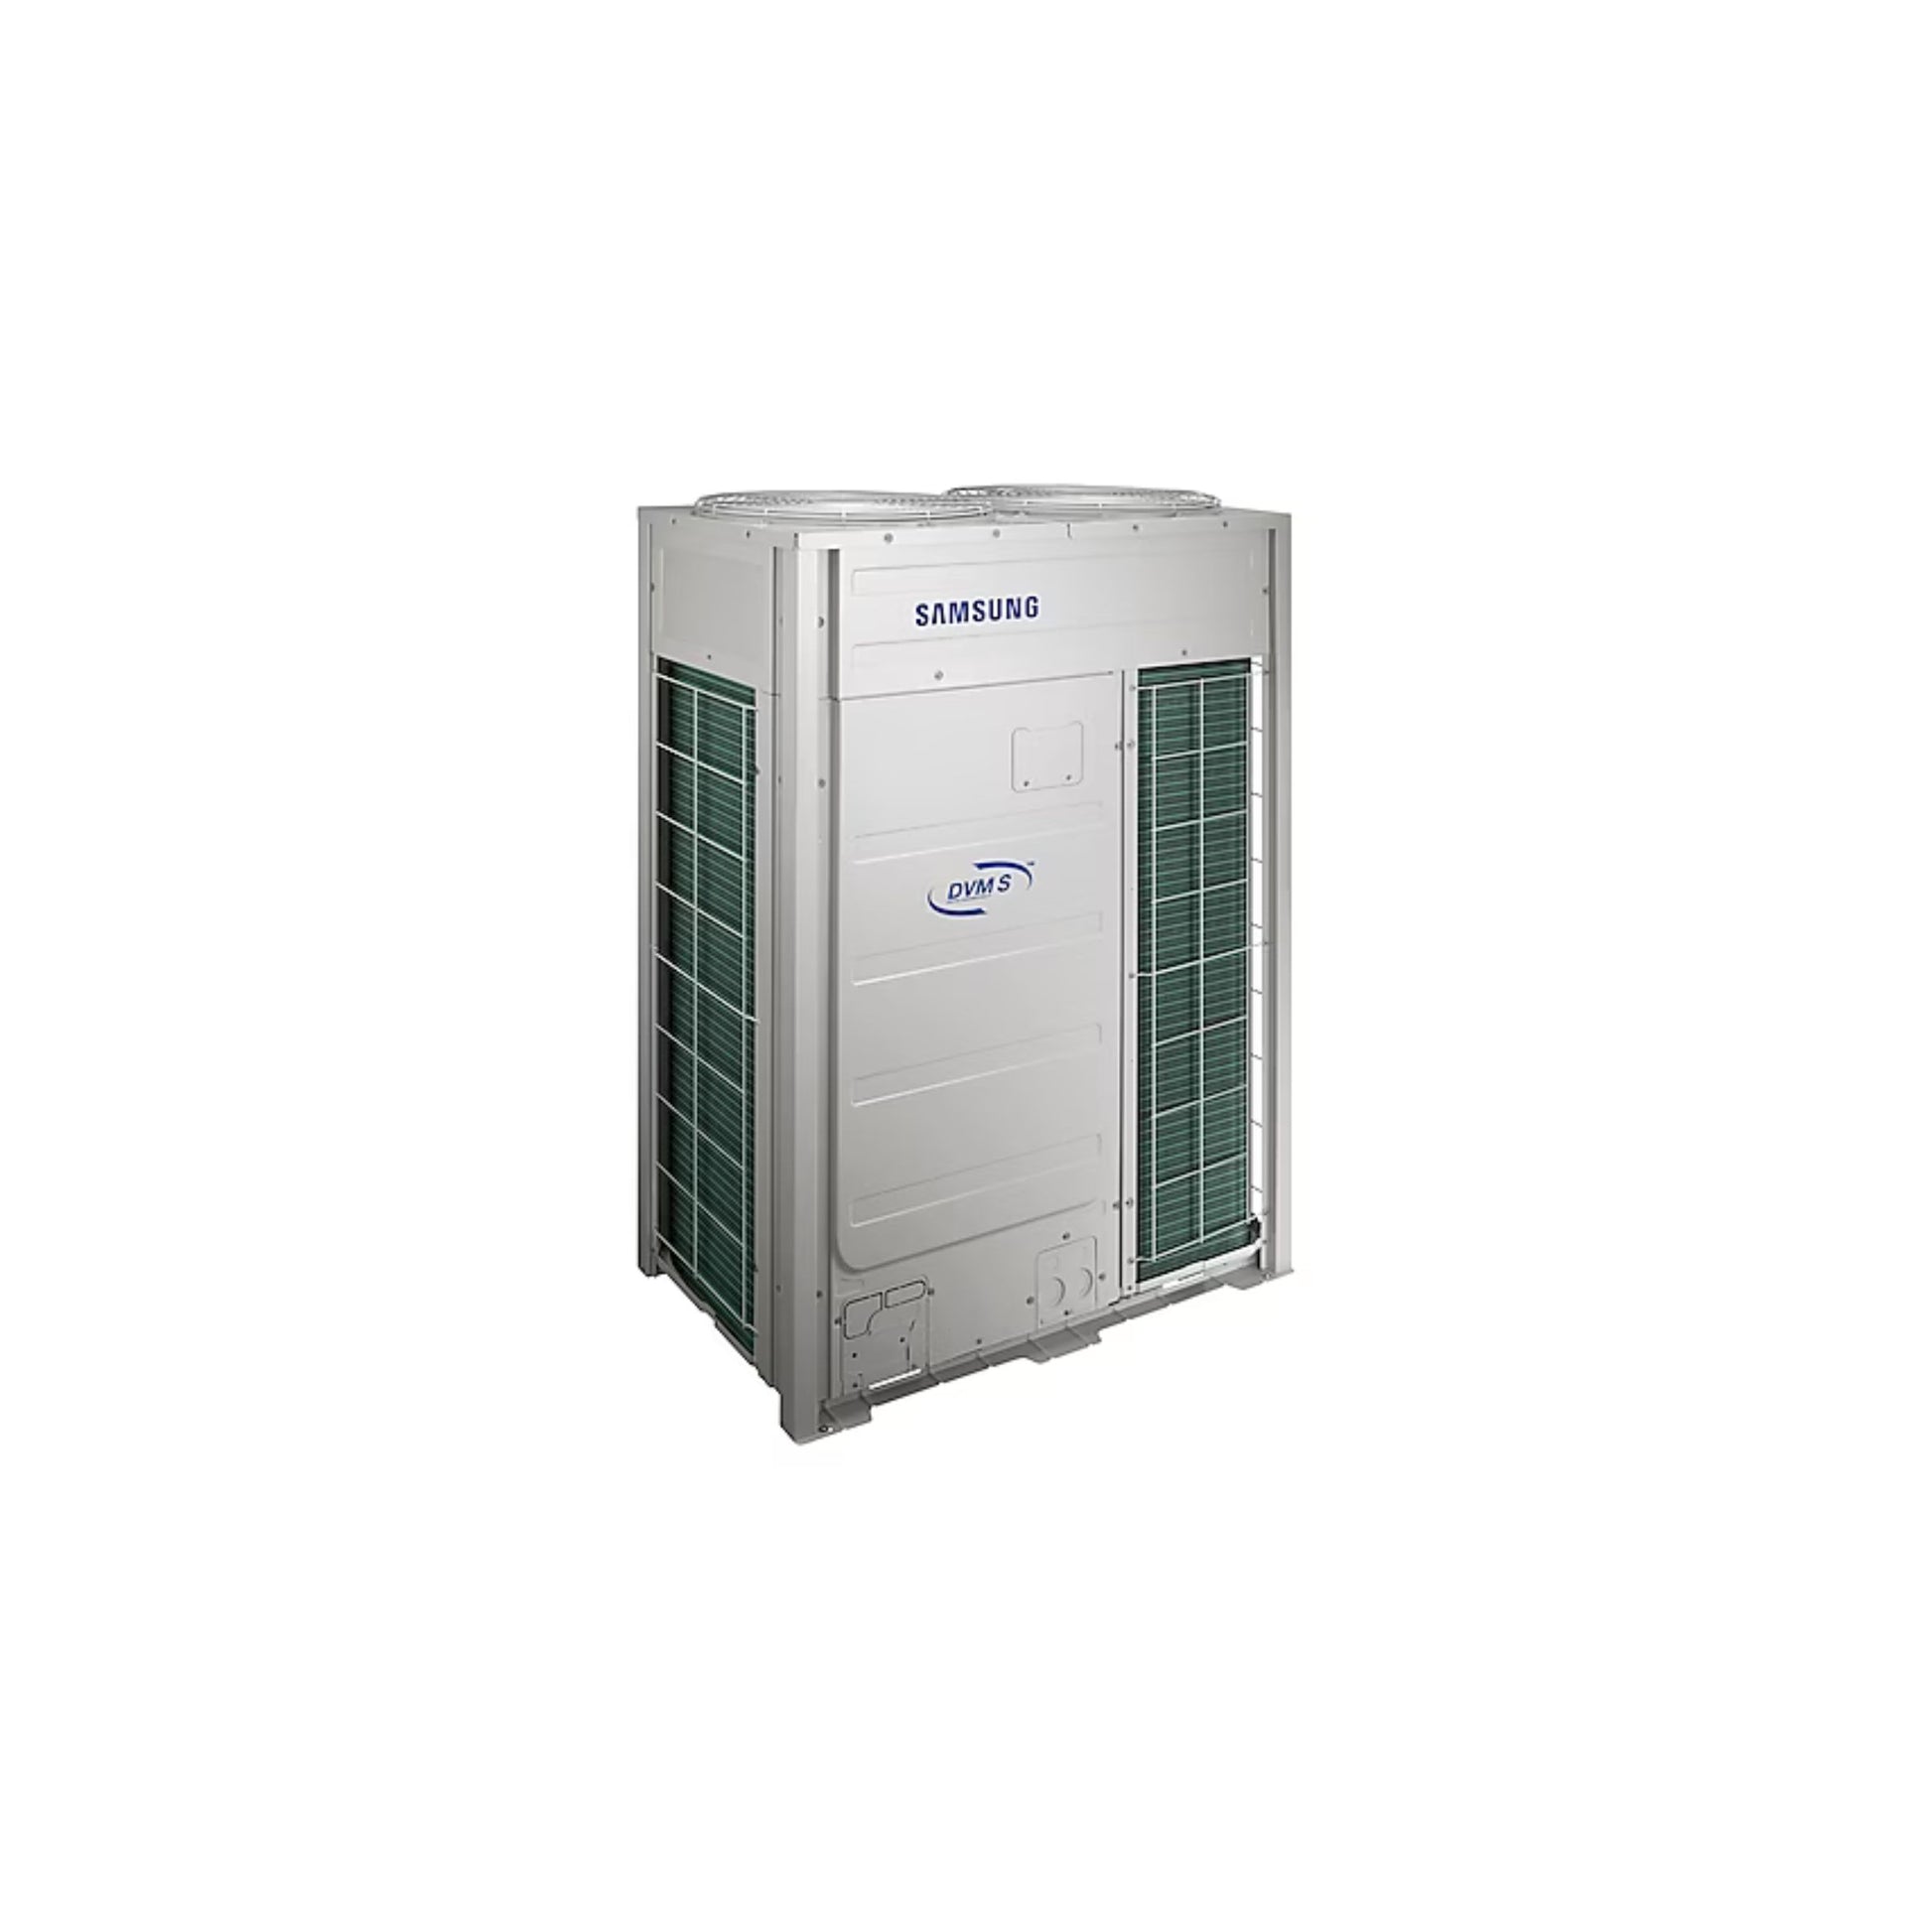 Samsung DVM S2 Standard Cooling Only Outdoor Unit Front View